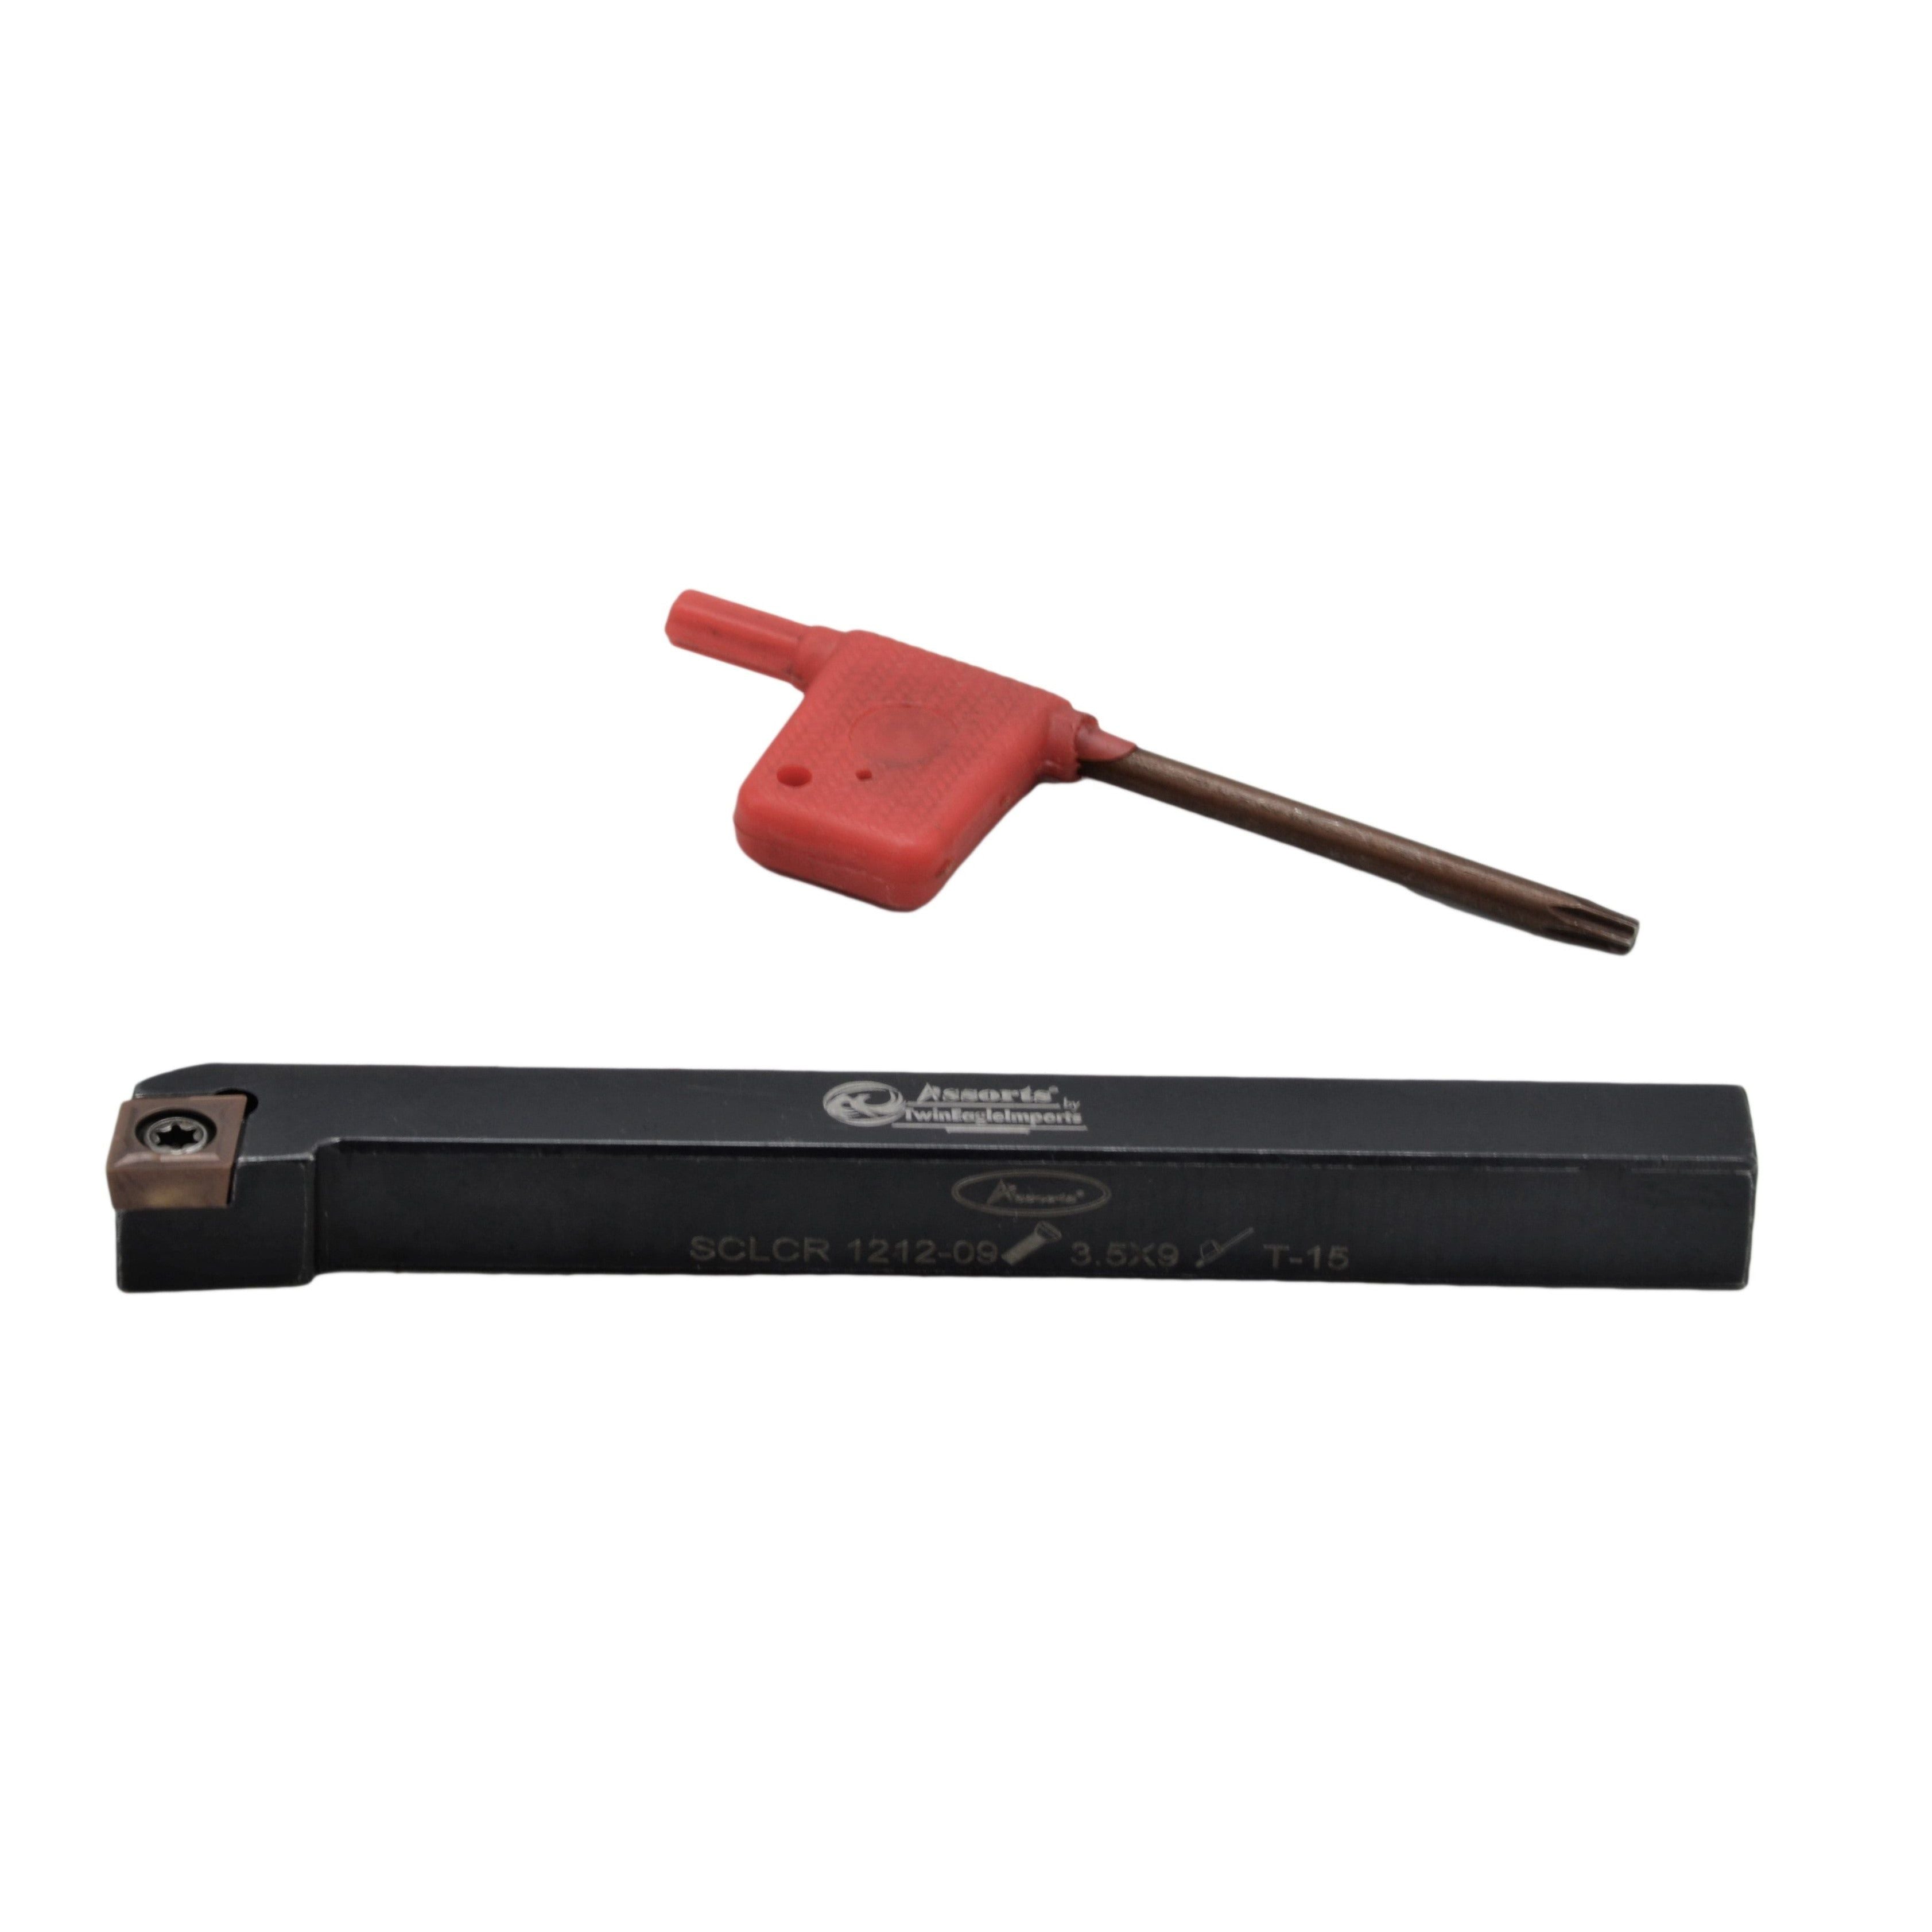 12mm Square Shank Turning Tool Holder with Insert & Key